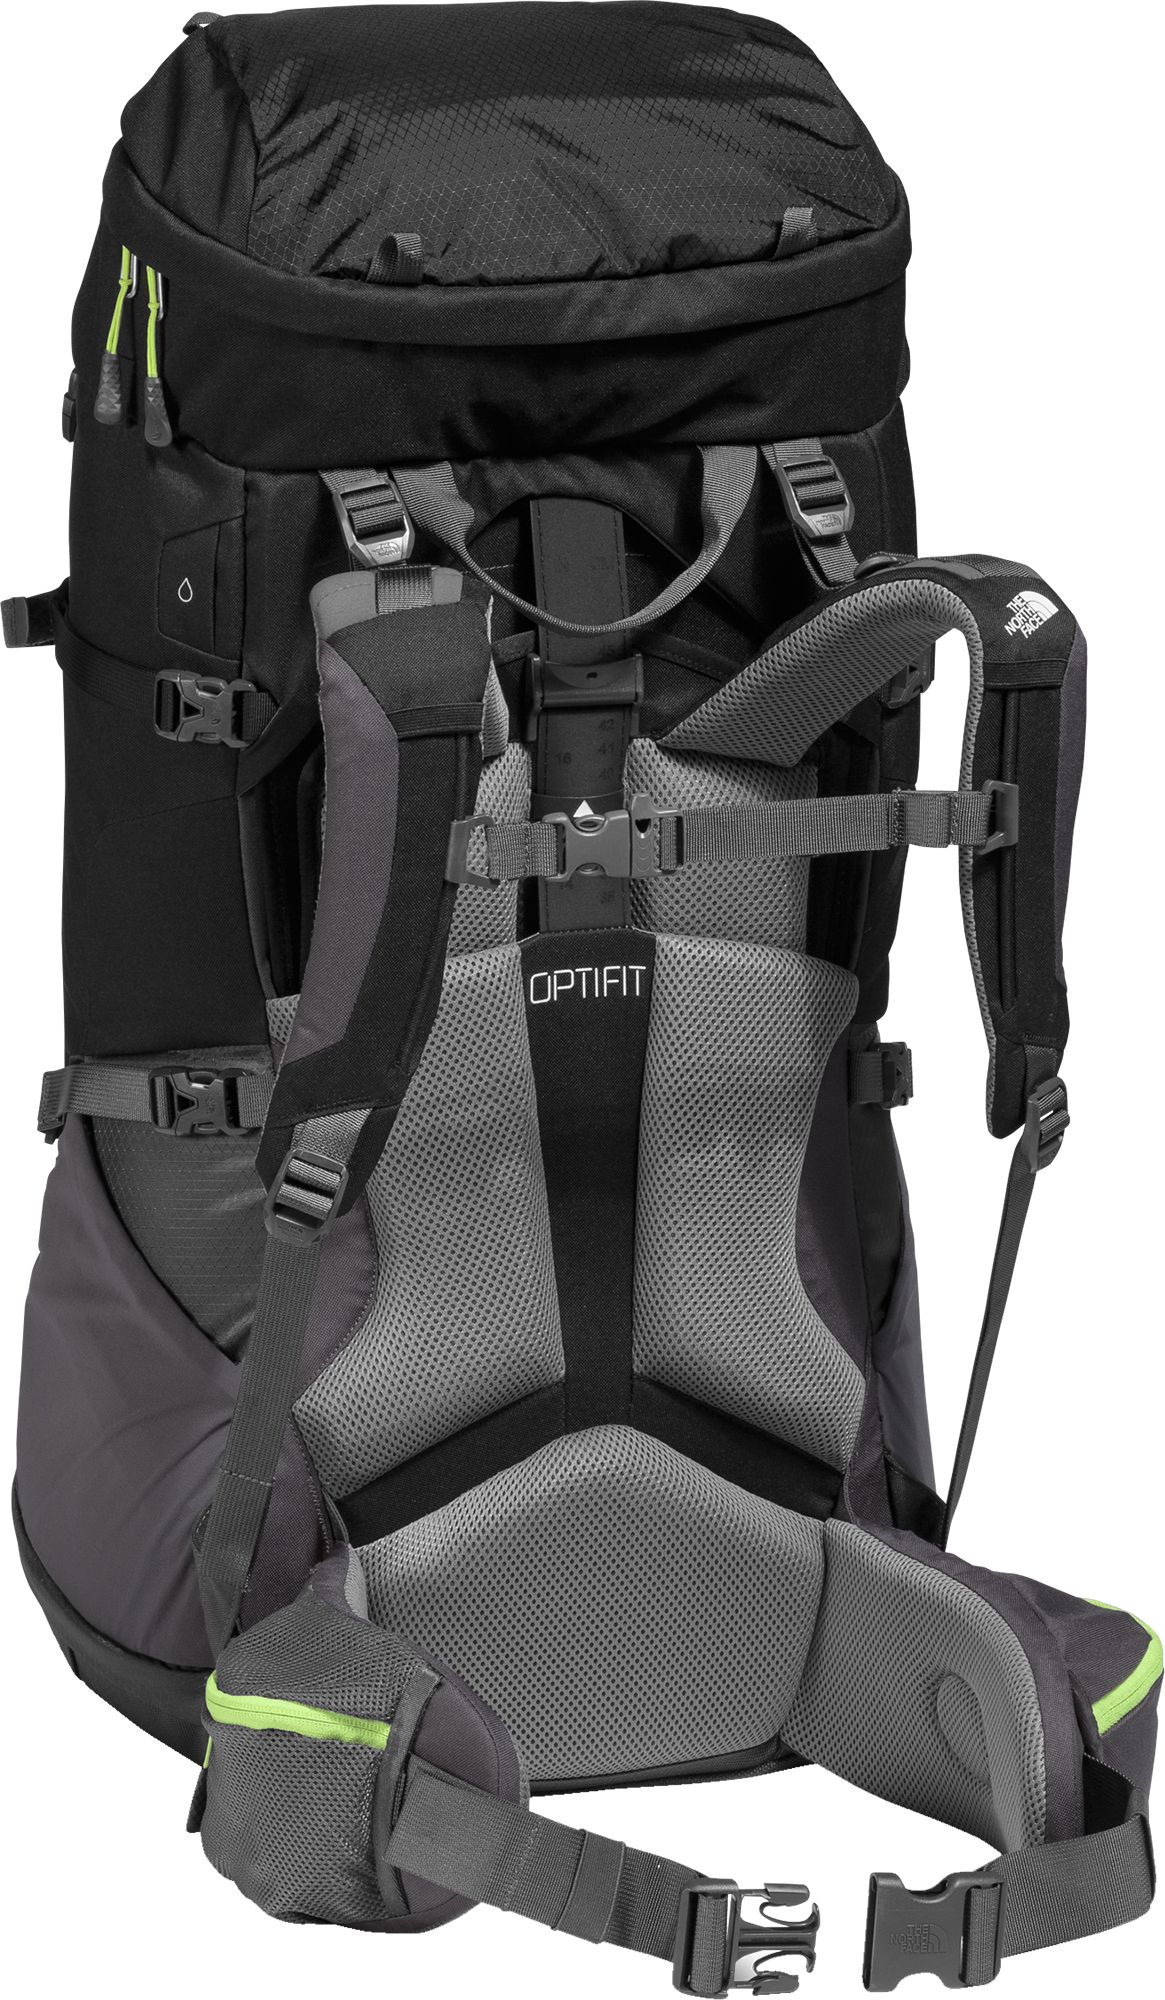 60l north face backpack